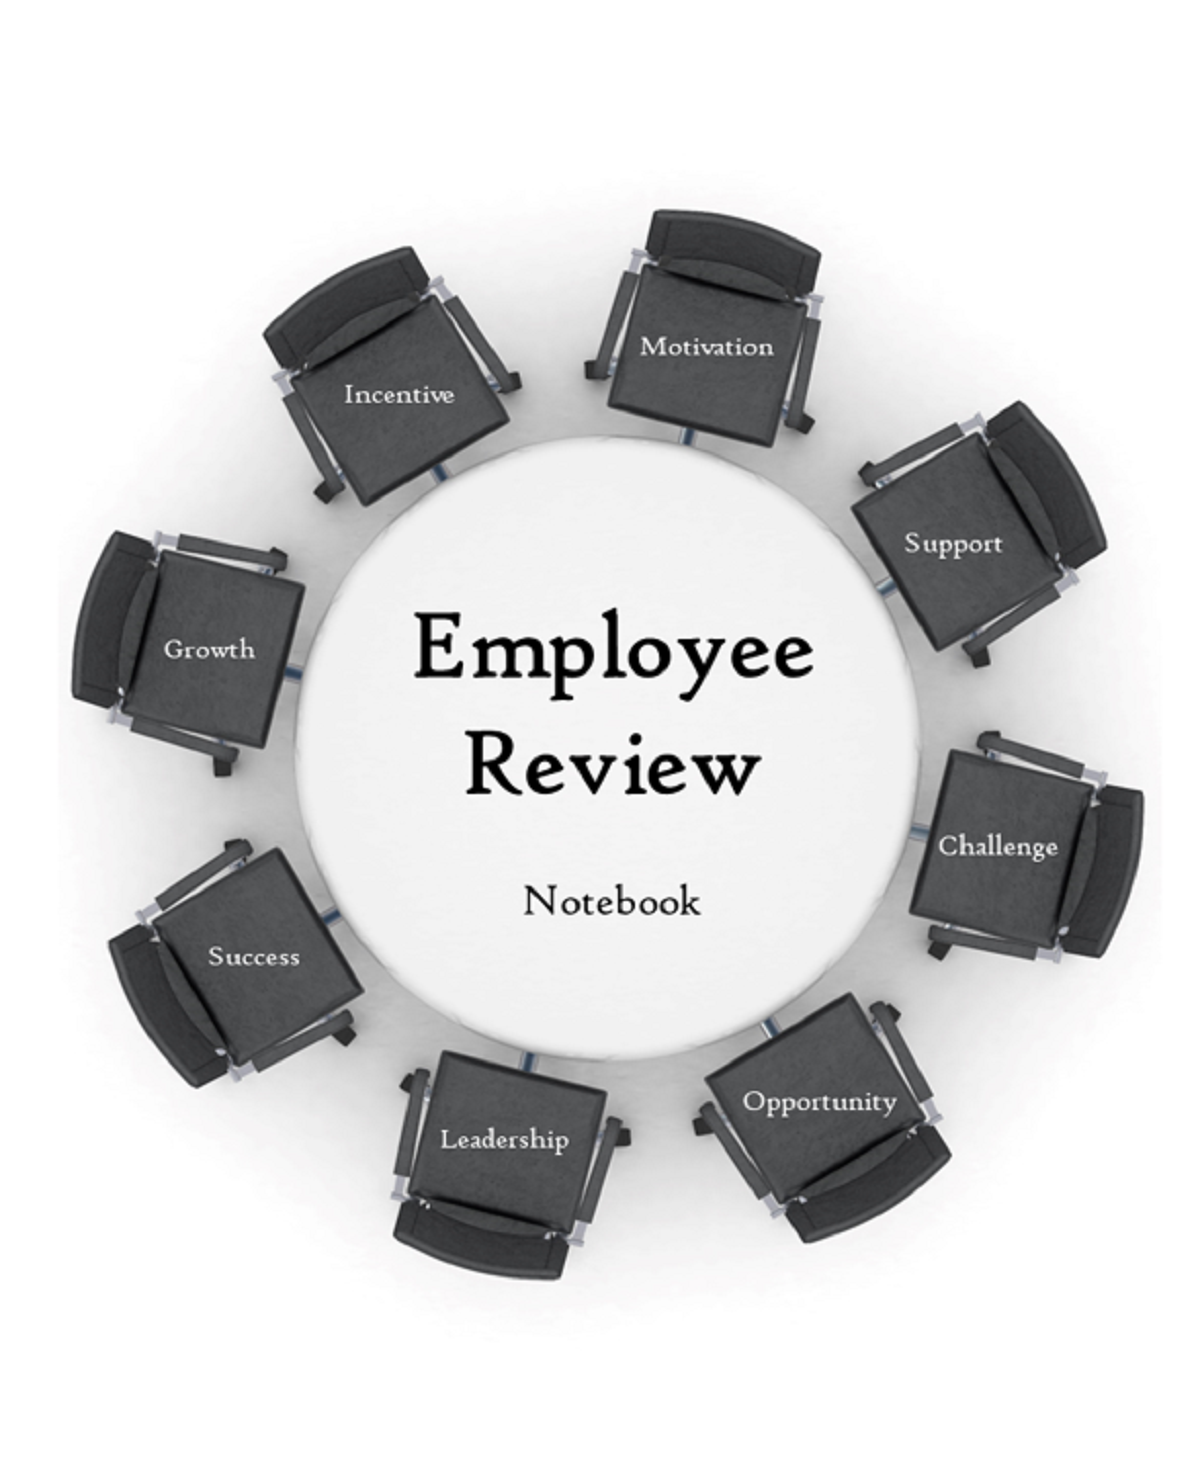 Employee Review Notebook